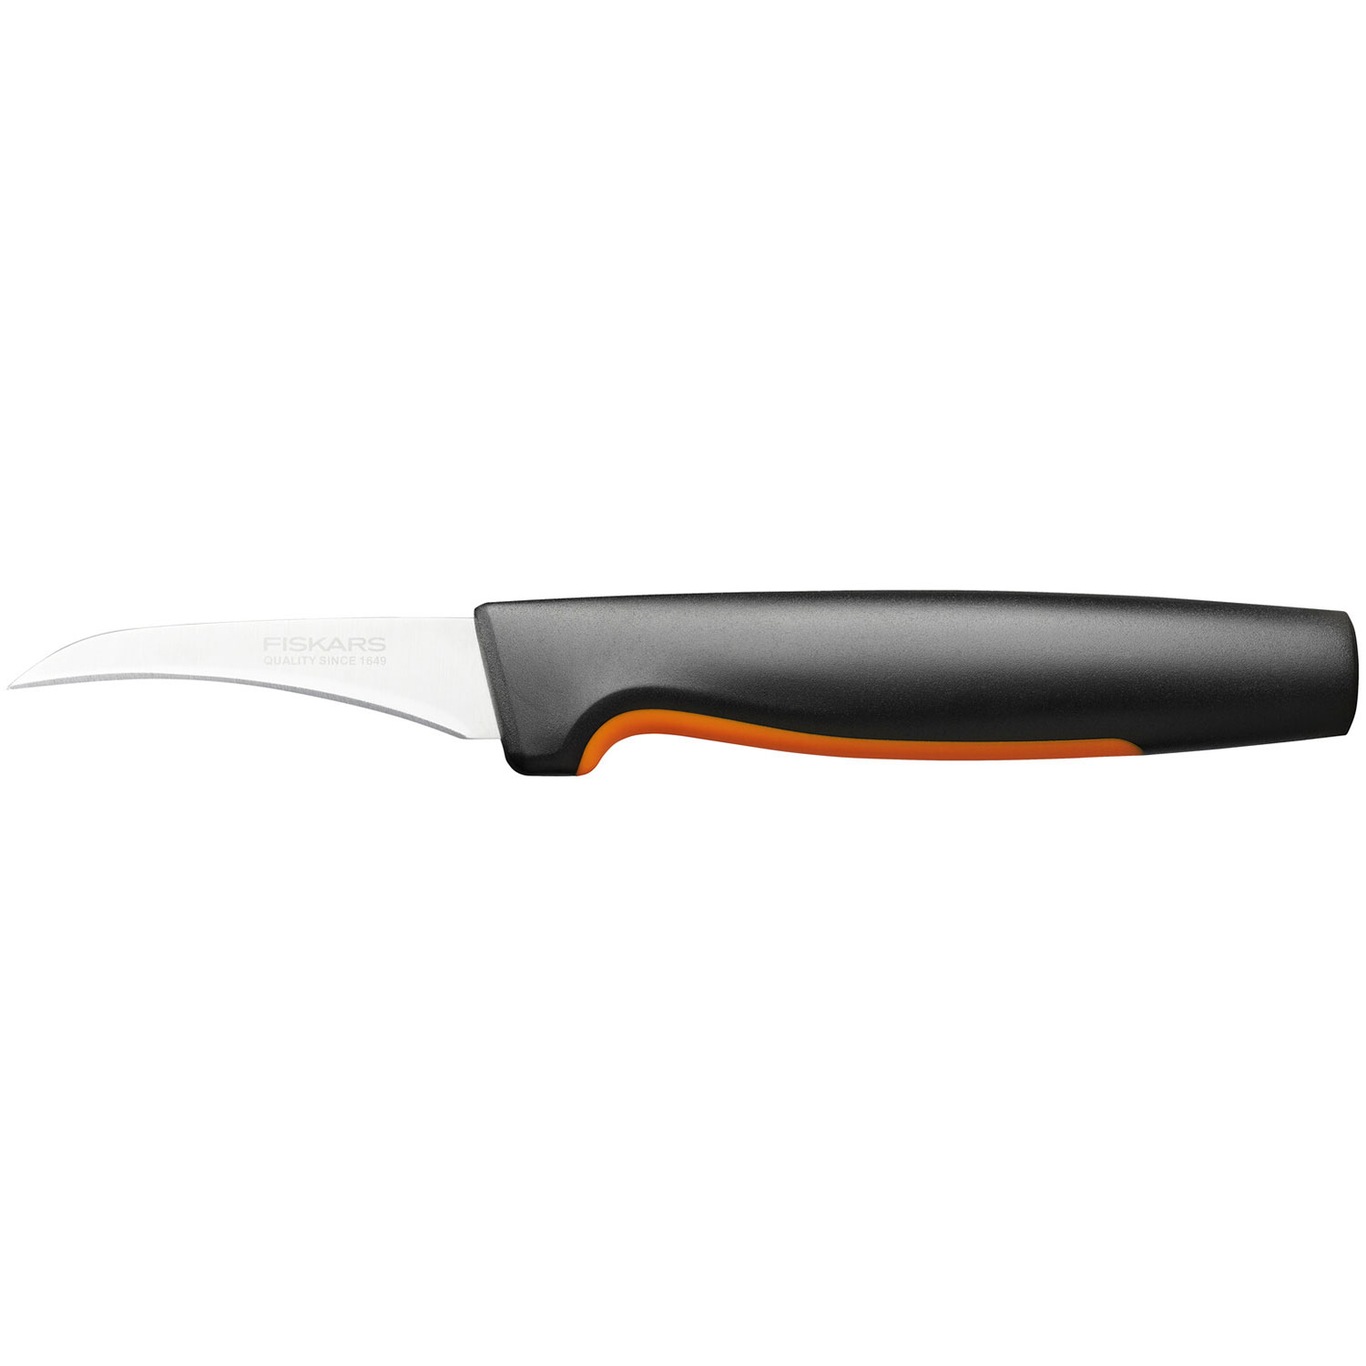 Functional Form Paring Knife, 7 cm